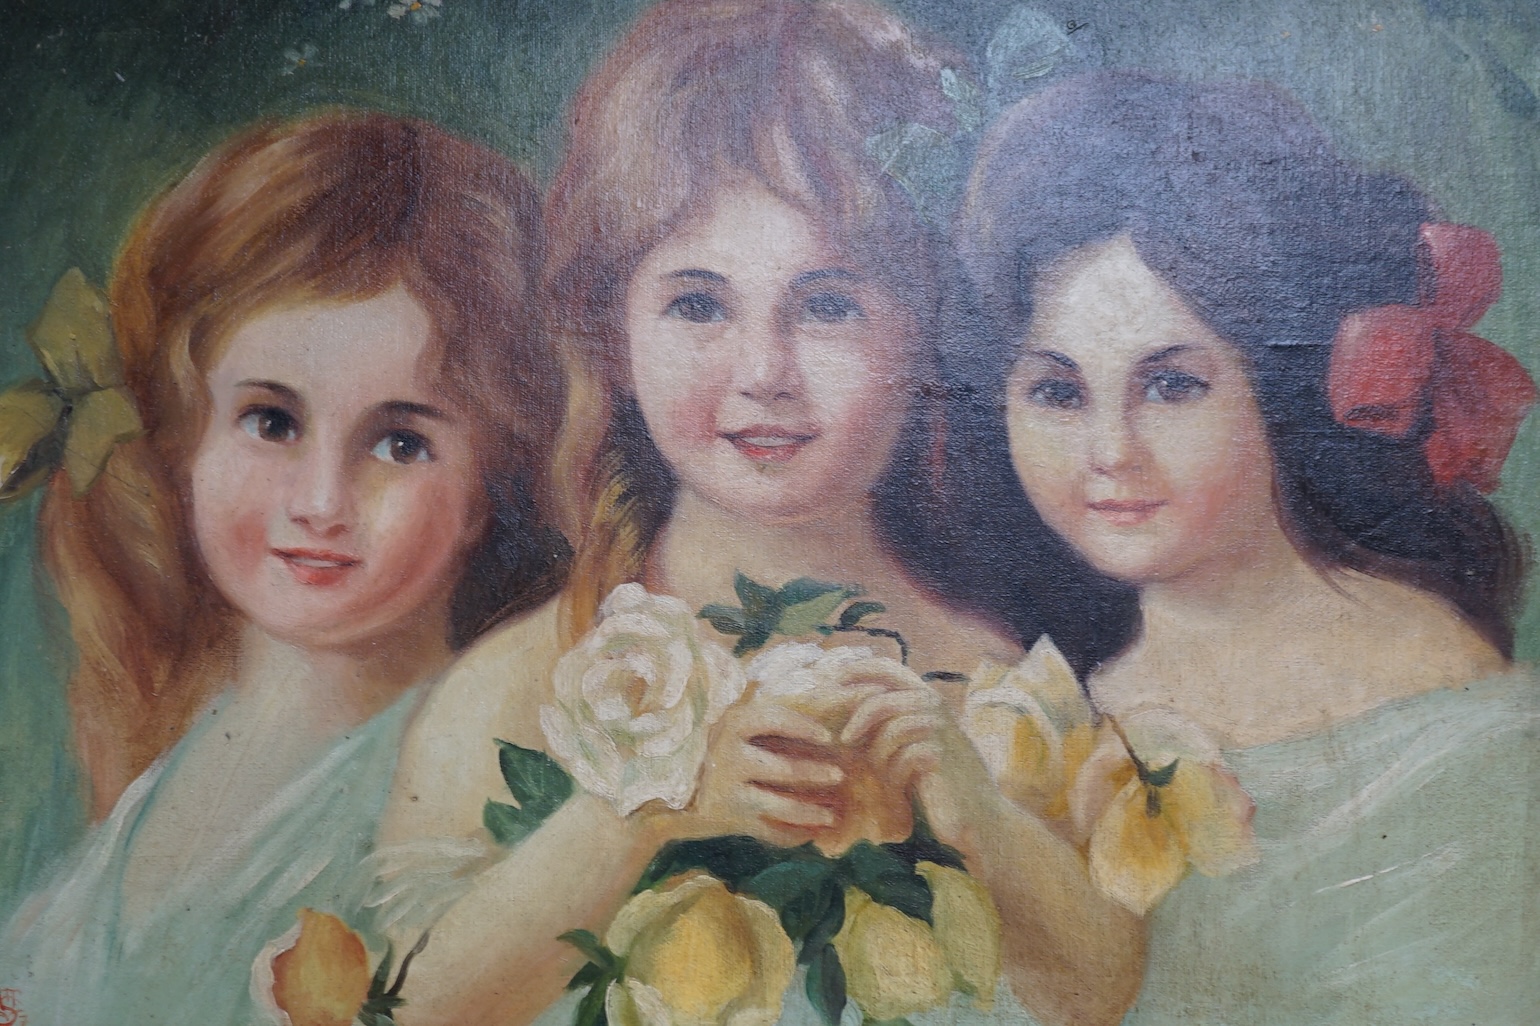 Decorative oil on board, Portrait of three girls holding flowers, 35 x 52cm. Condition - good, some surface dirt